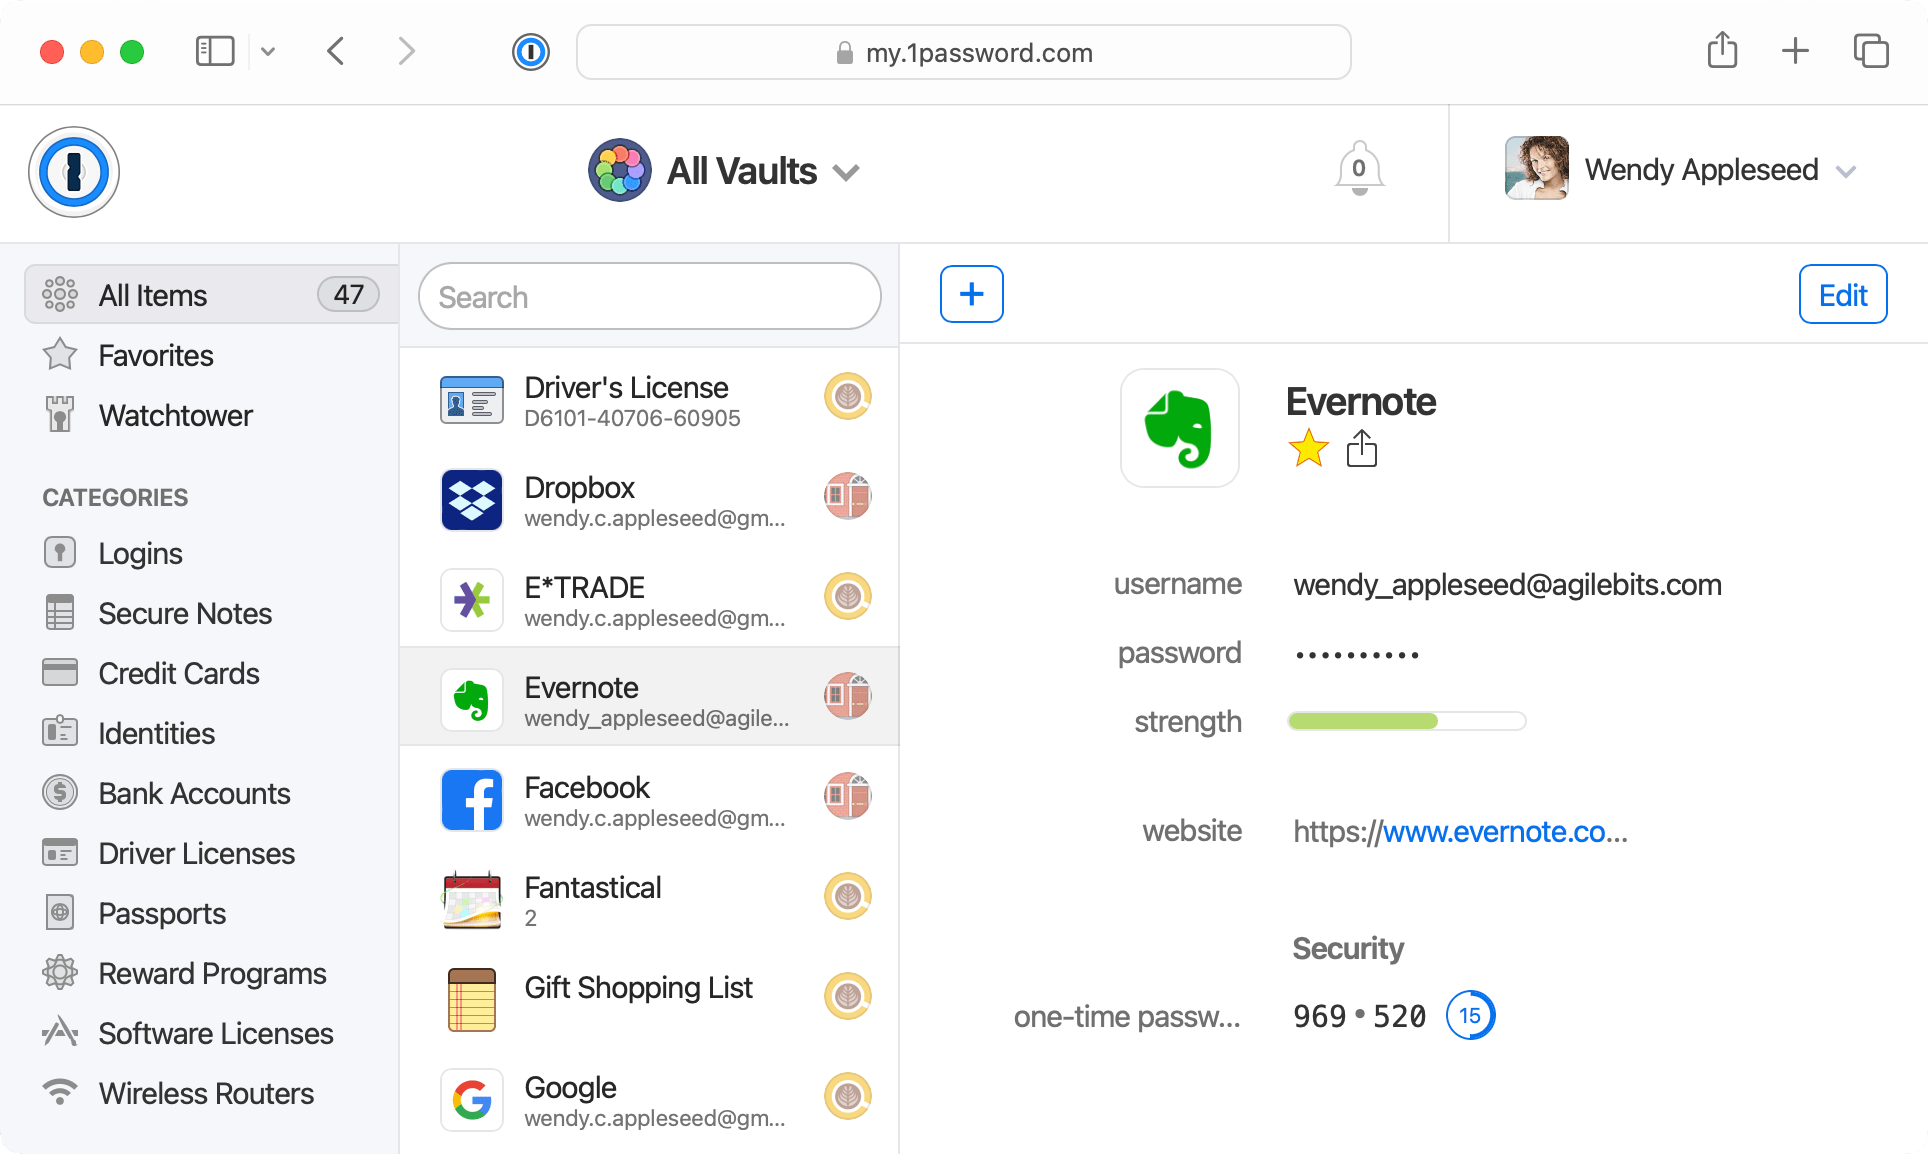 a screenshot of a 1Password vault showing accounts and their related credentials